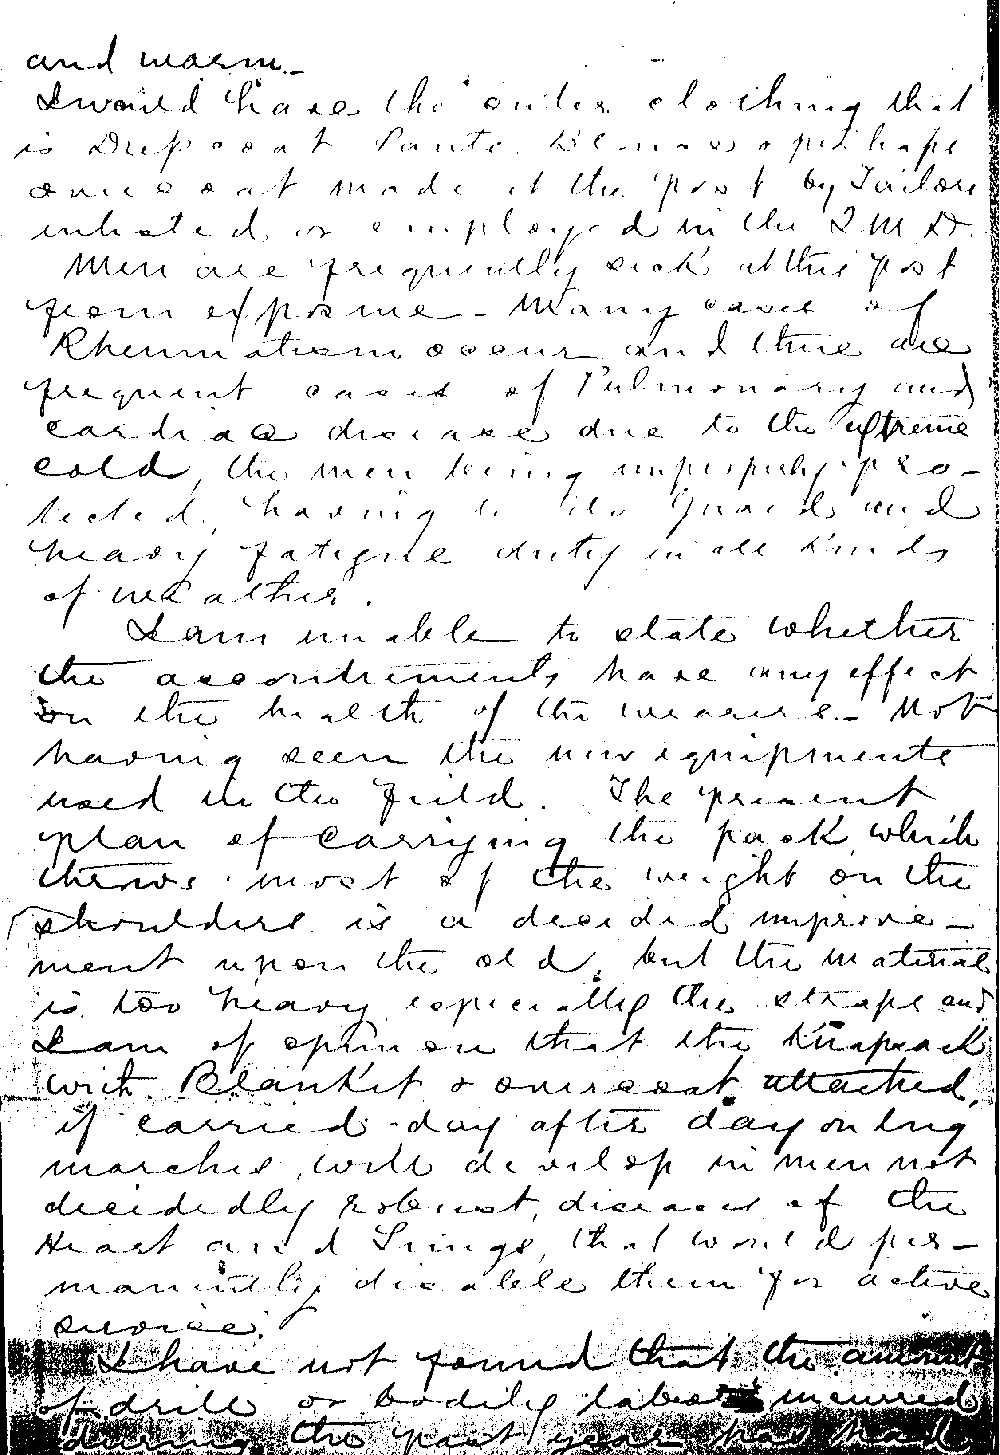 Officers took seriously their duty to oversee the well-being of the soldiers. The condition of enlisted men’s clothing at Fort Buford was not acceptable to the post surgeon who wrote up this report. Though complaining about conditions was common among all soldiers, one of the few places where an official complaint was acceptable was in a report concerning the welfare of the soldiers.